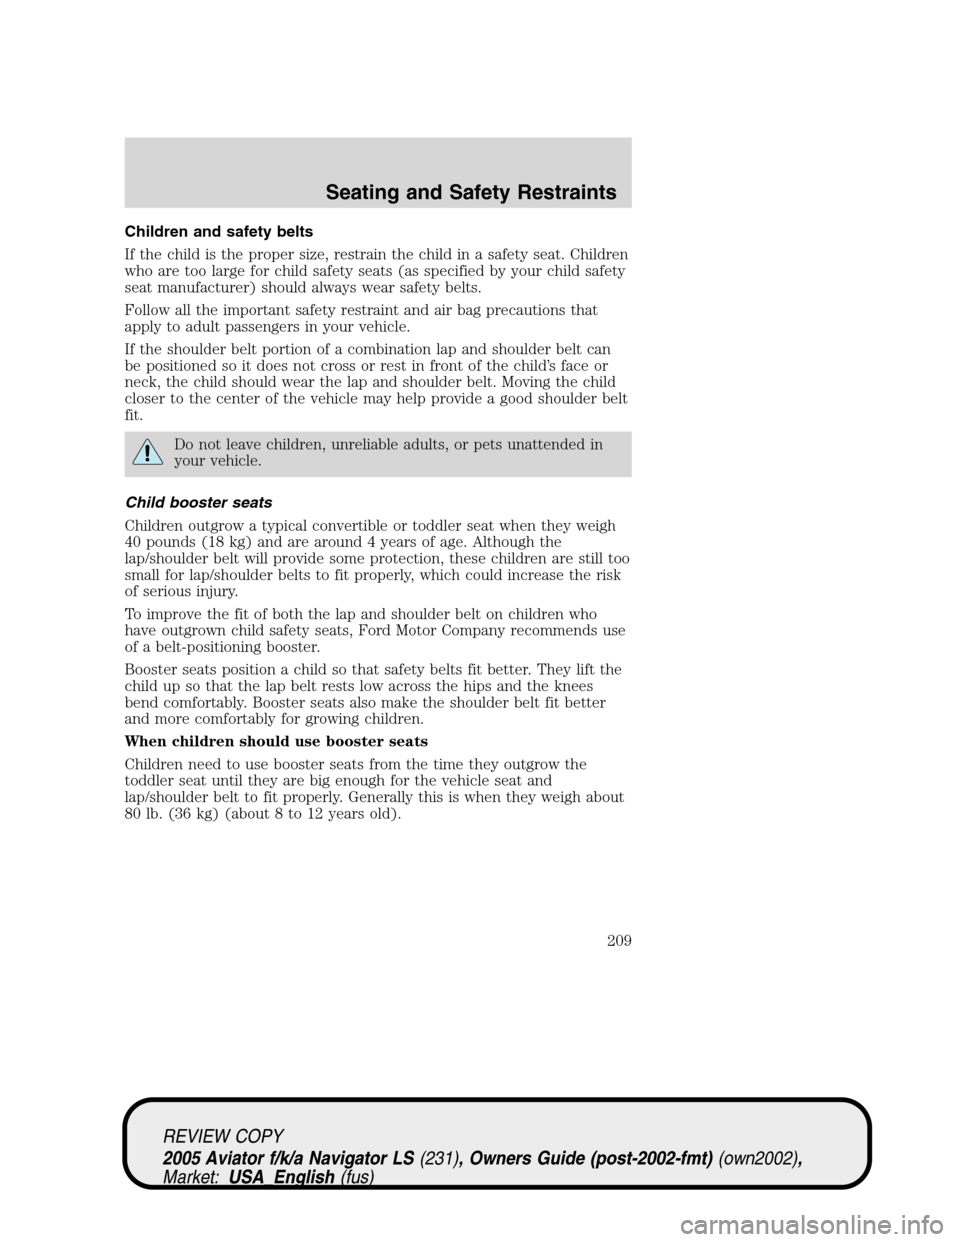 LINCOLN AVIATOR 2005 Owners Manual Children and safety belts
If the child is the proper size, restrain the child in a safety seat. Children
who are too large for child safety seats (as specified by your child safety
seat manufacturer) 